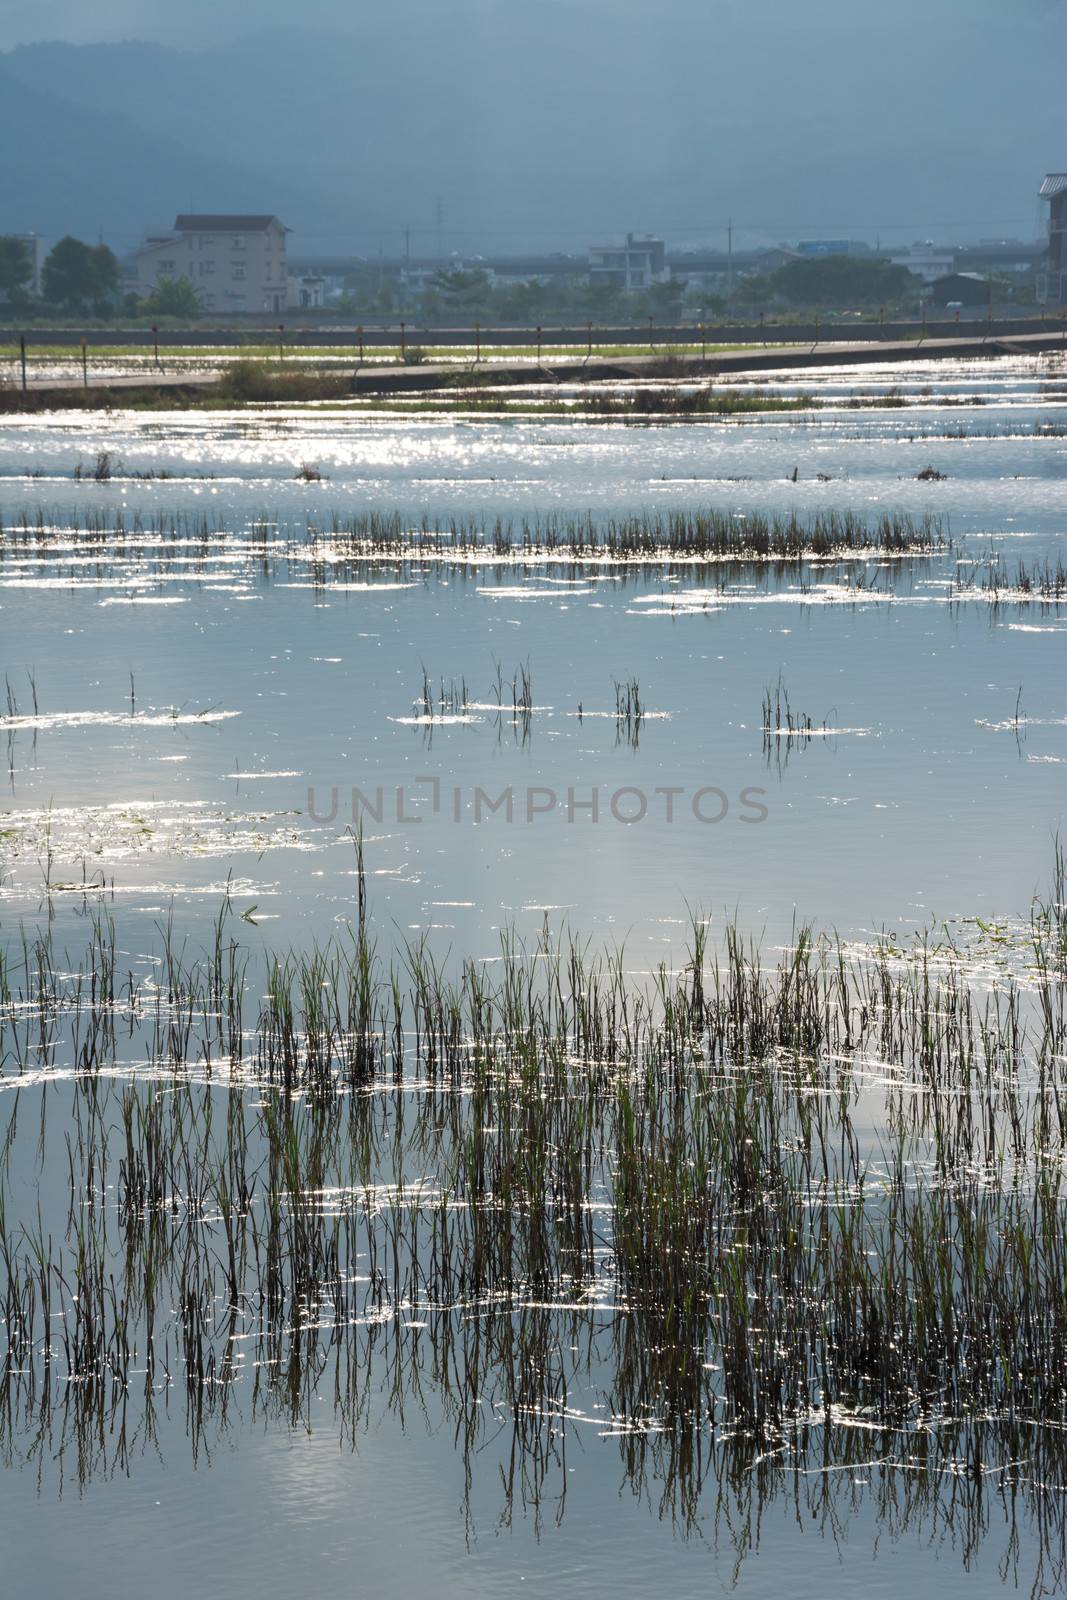 Landscape with a swamp, shot at Yilan county, Taiwan, Asia.